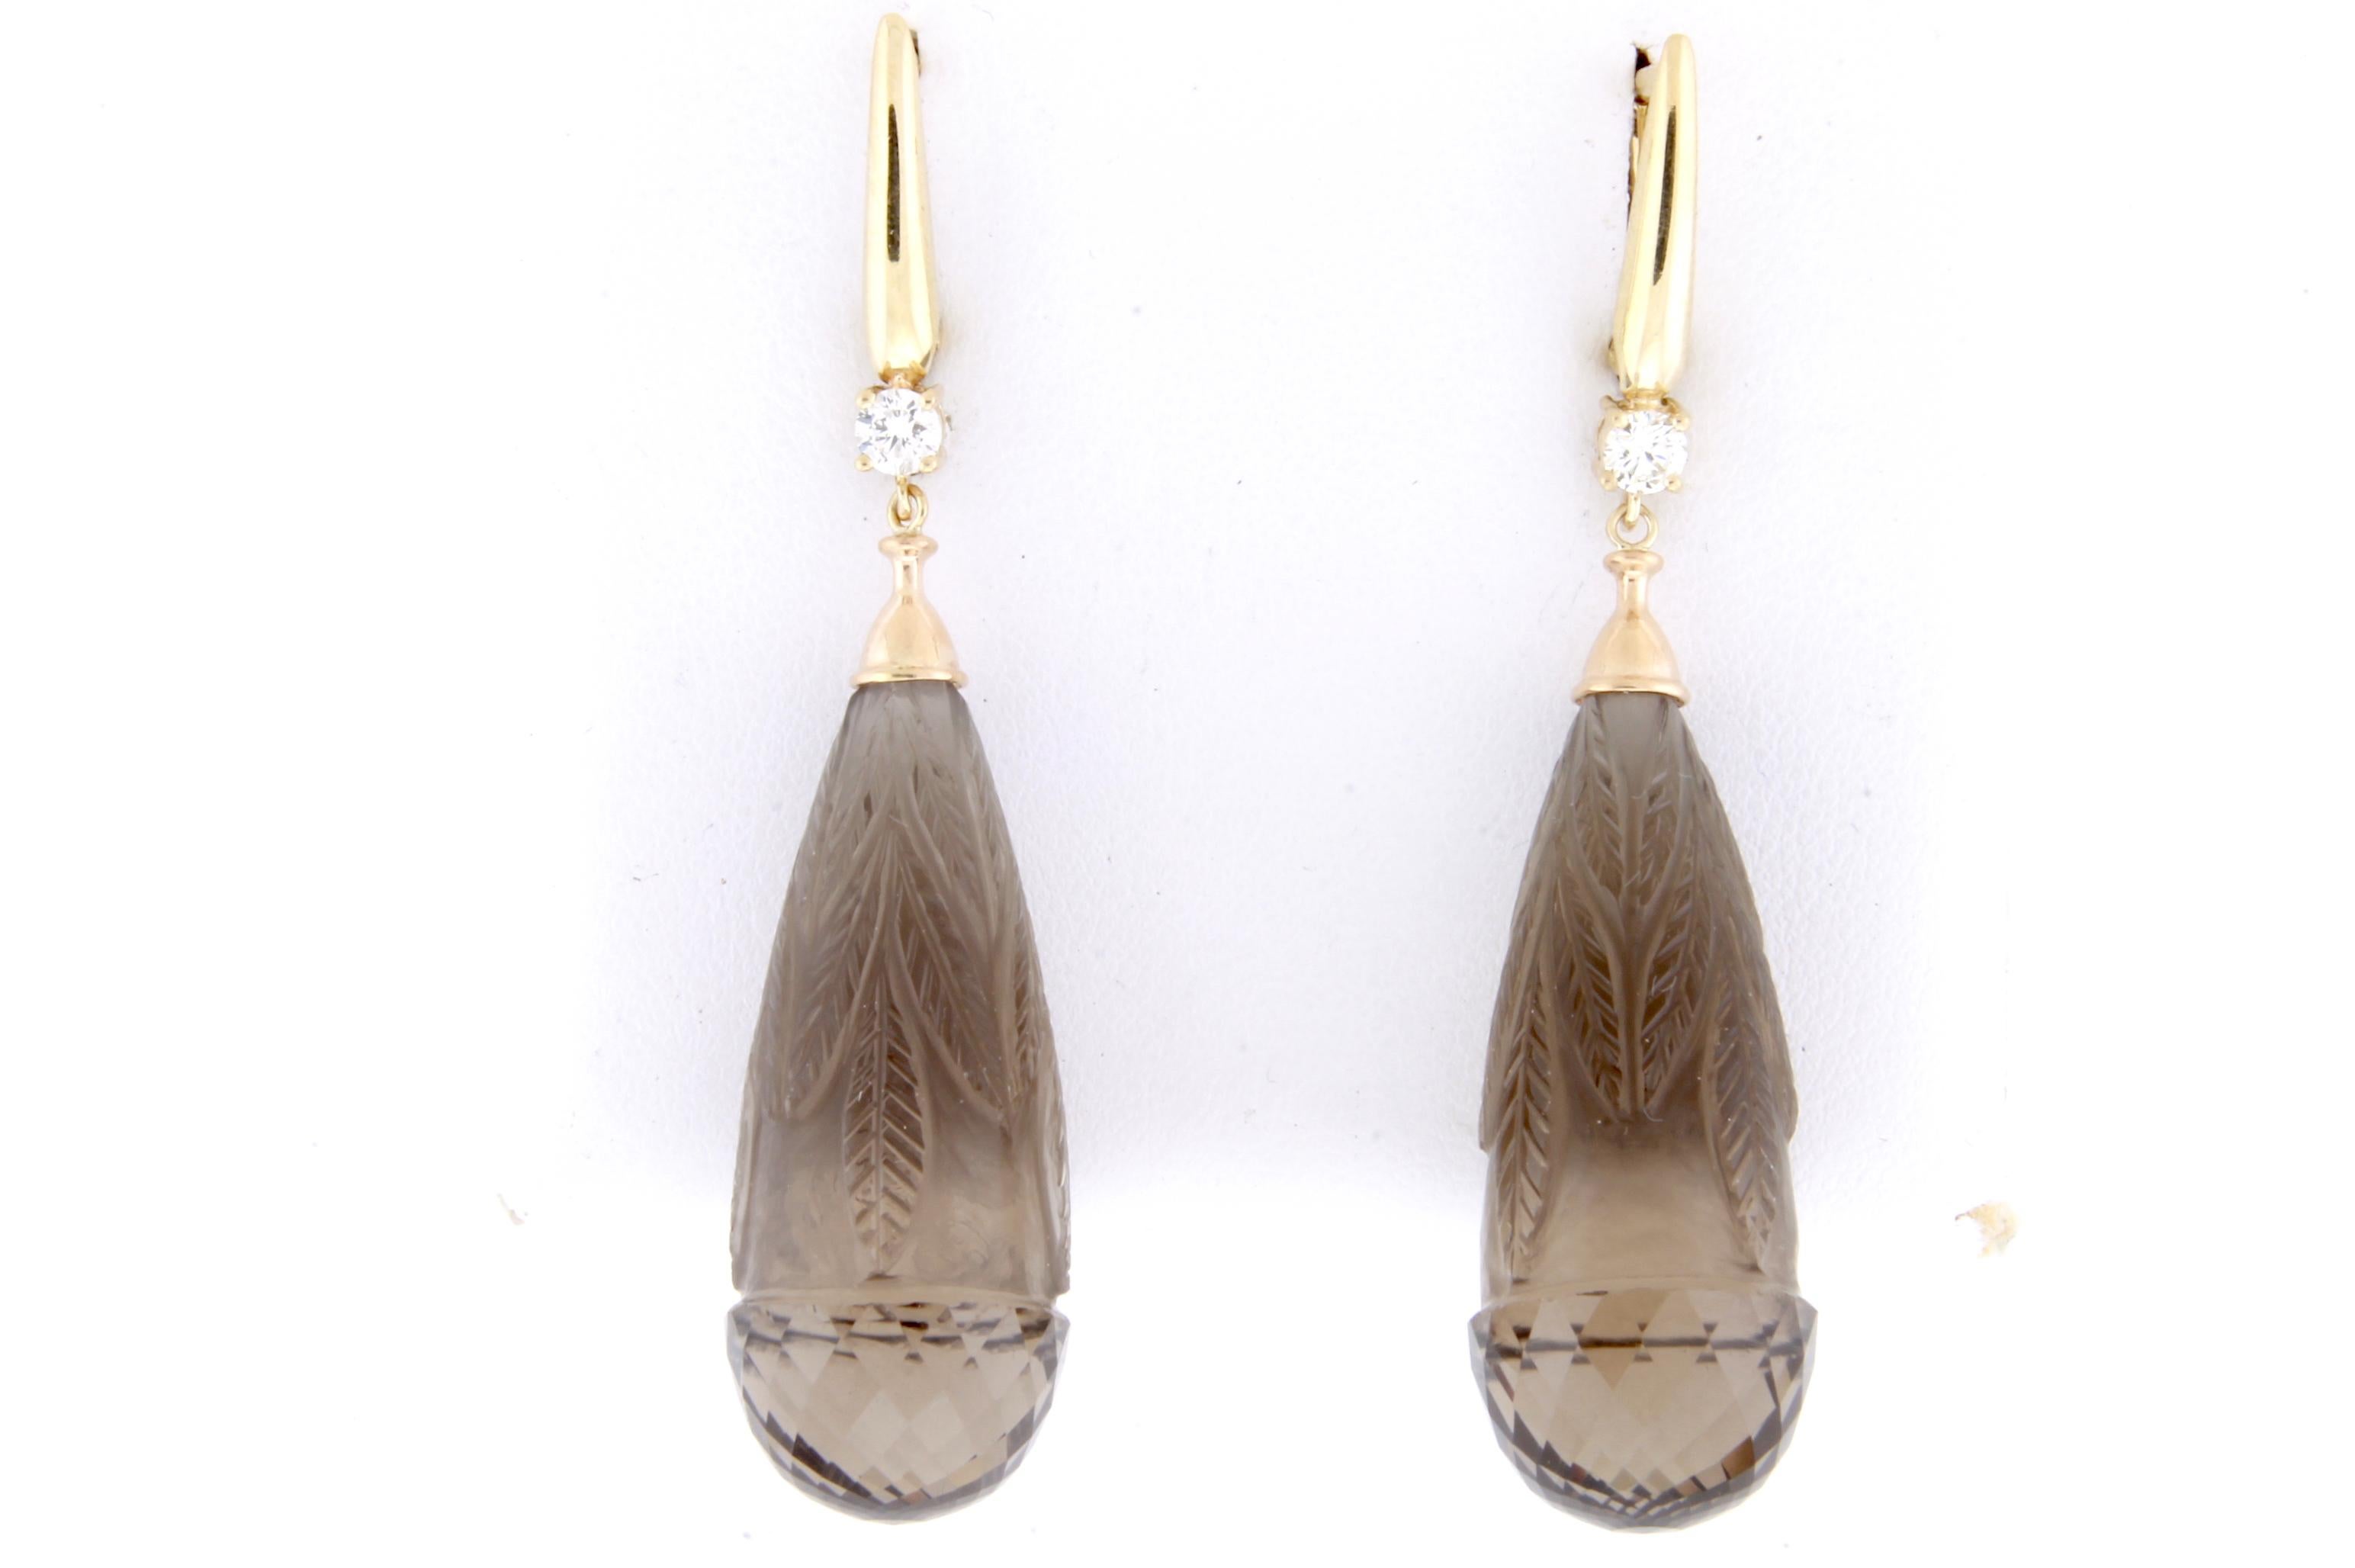 When these Smokey Quartz stones came across our desk, we knew exactly what to do with them. At 86.75 Carats, these drop earrings are a show stopper. Mounted on a 14k Yellow Gold setting with 2 diamonds, these earrings were created with Alberto's top